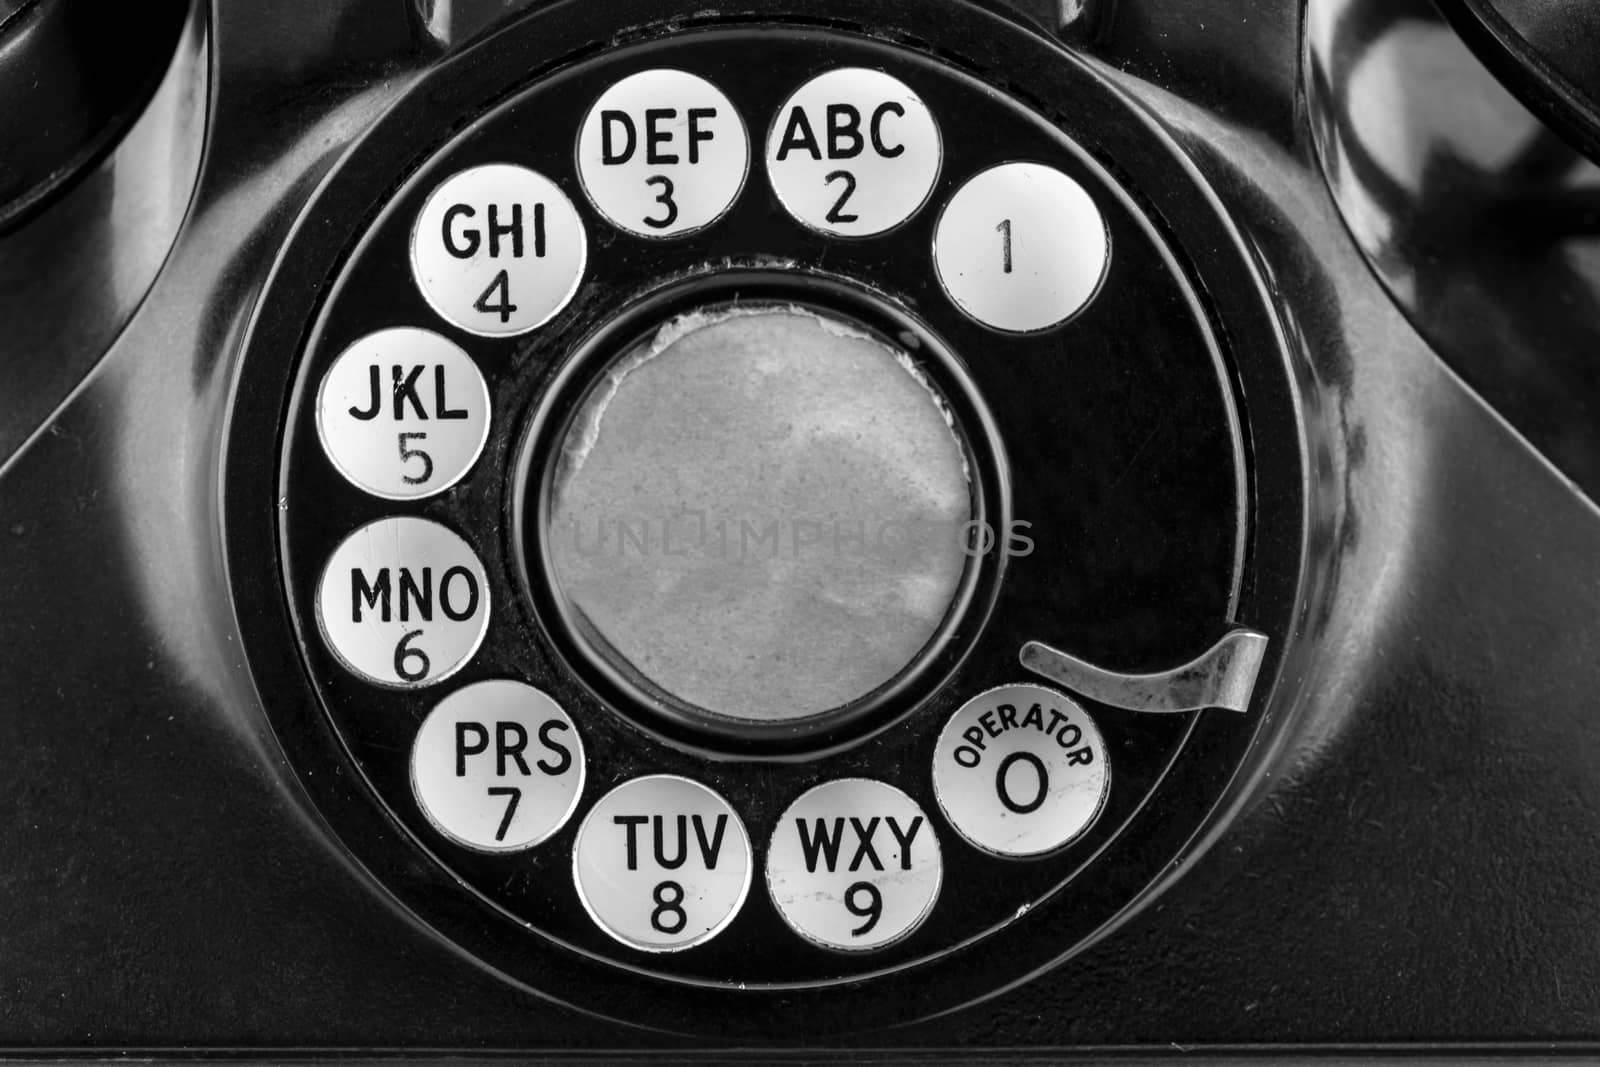 Rotary phone dial in black and white. 